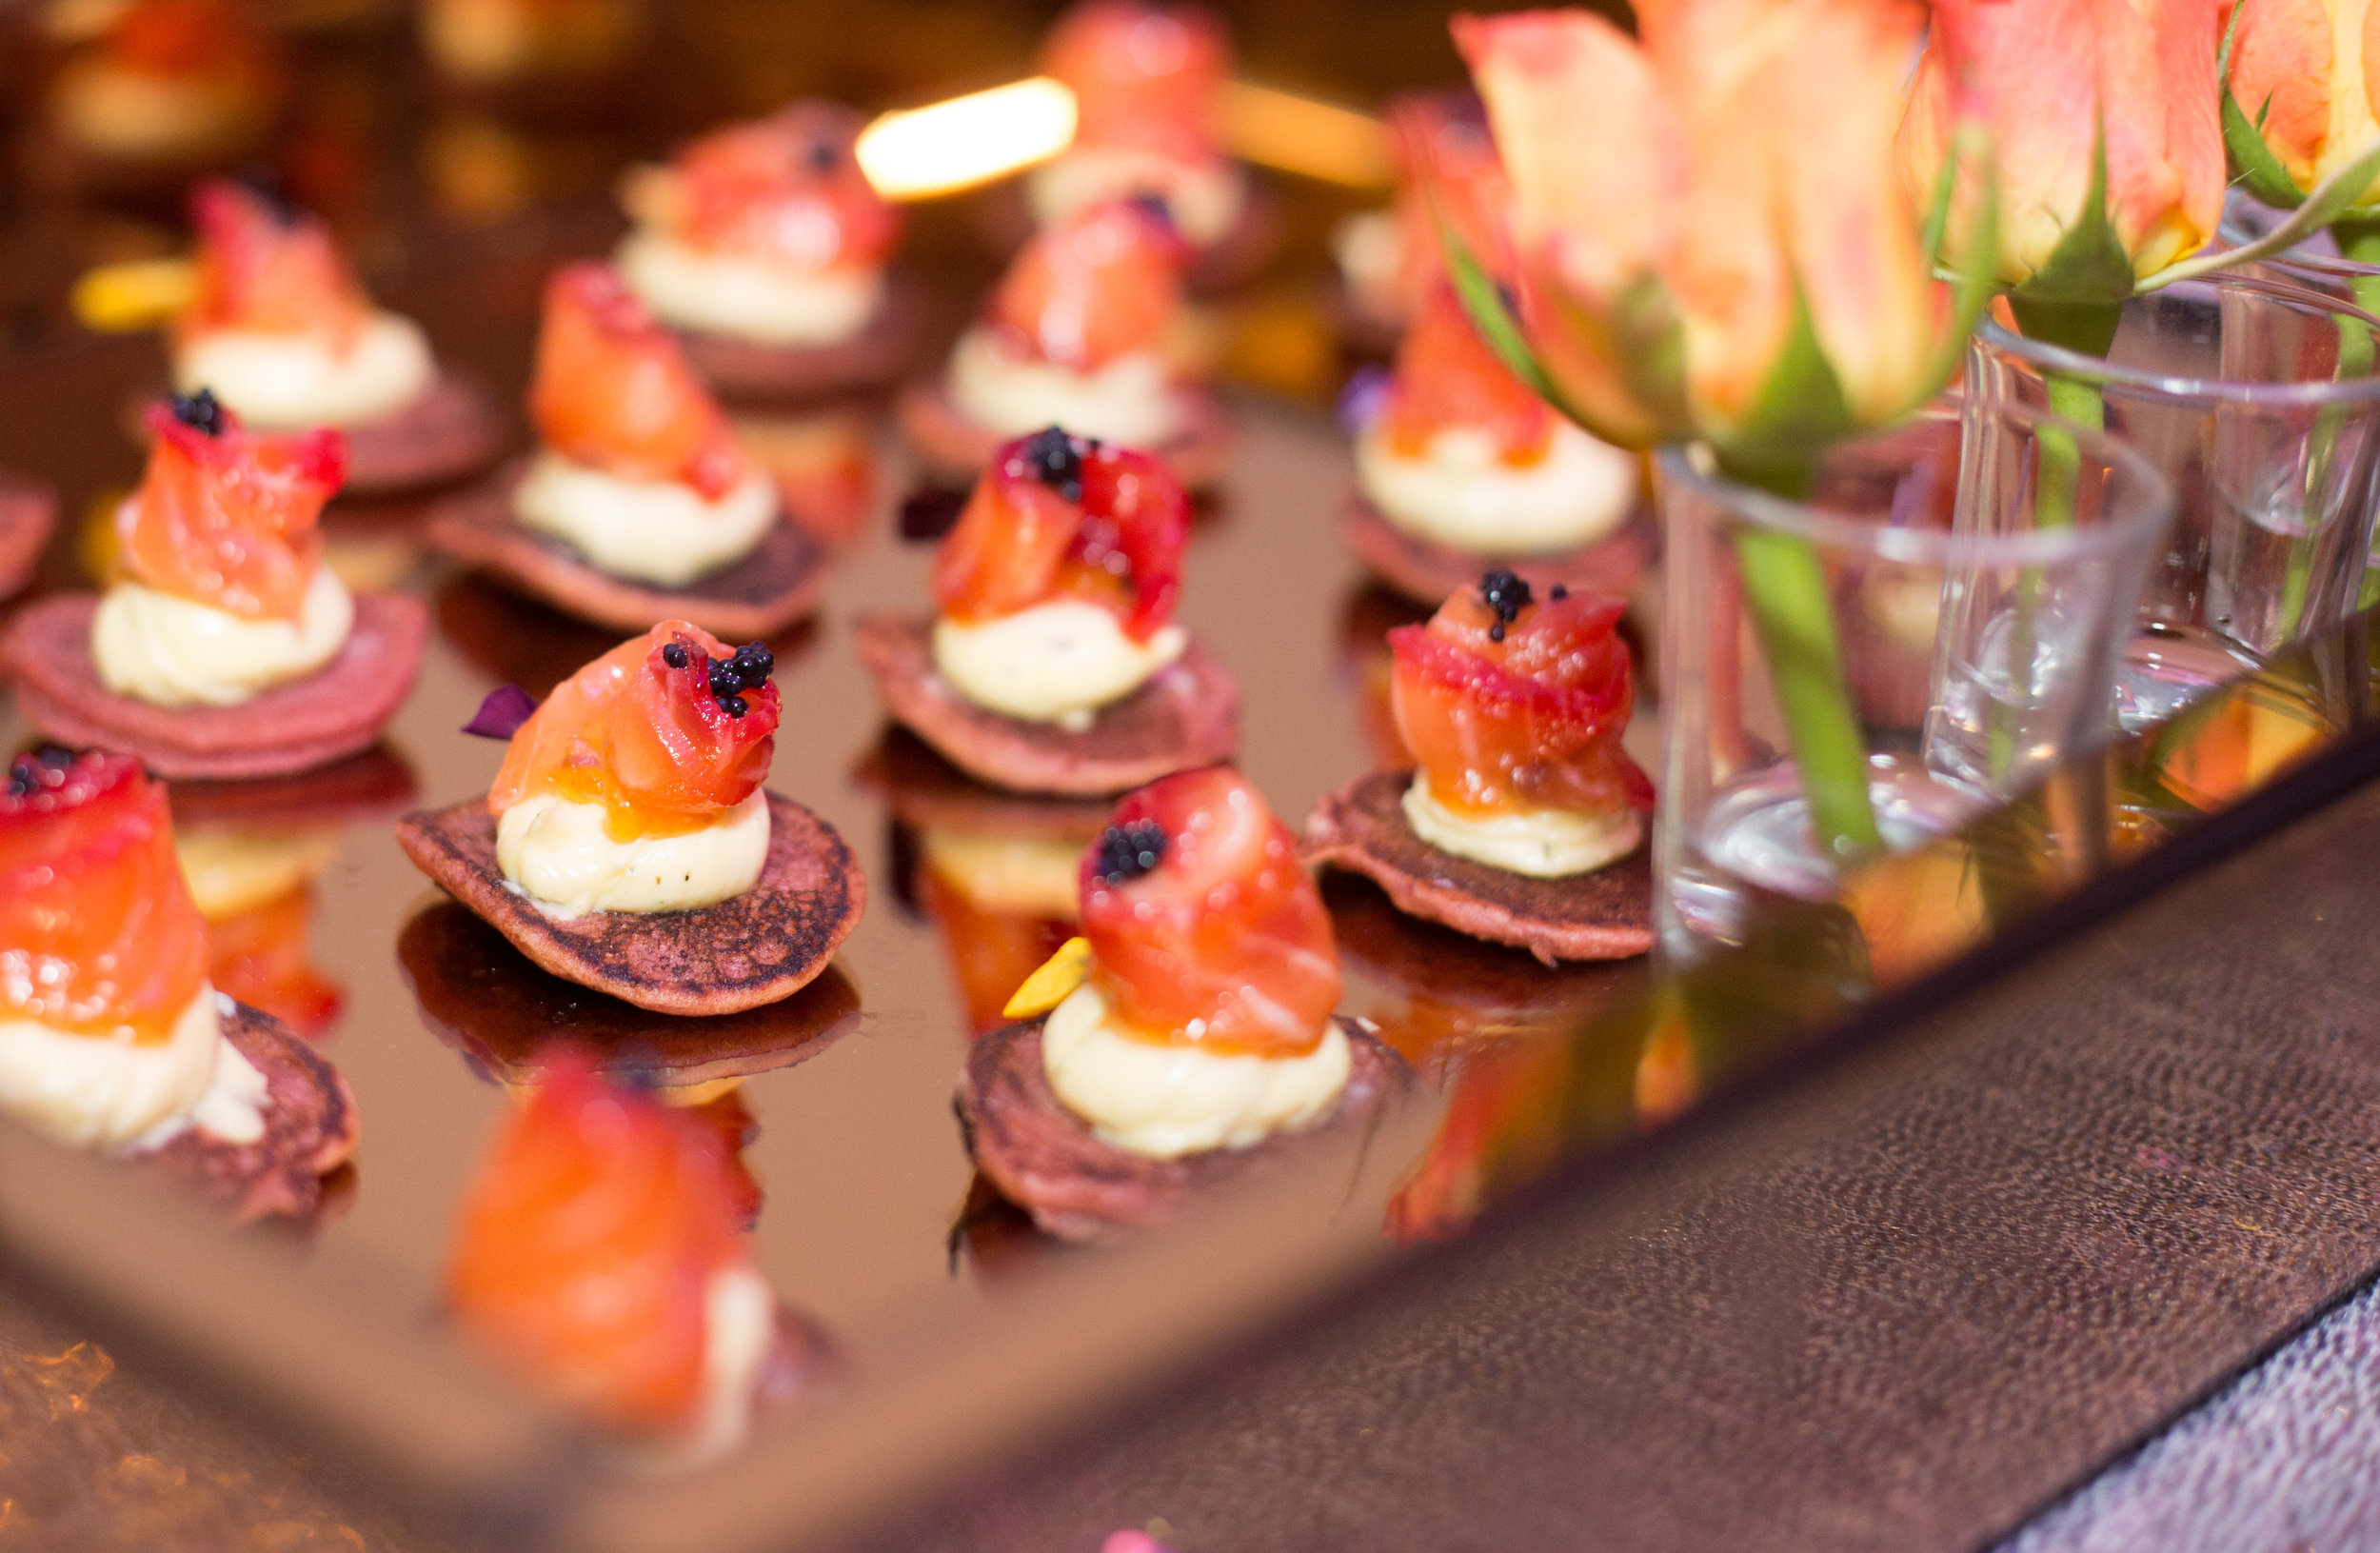 Luxury canapés, bowl food and dining — Joy Of Taste